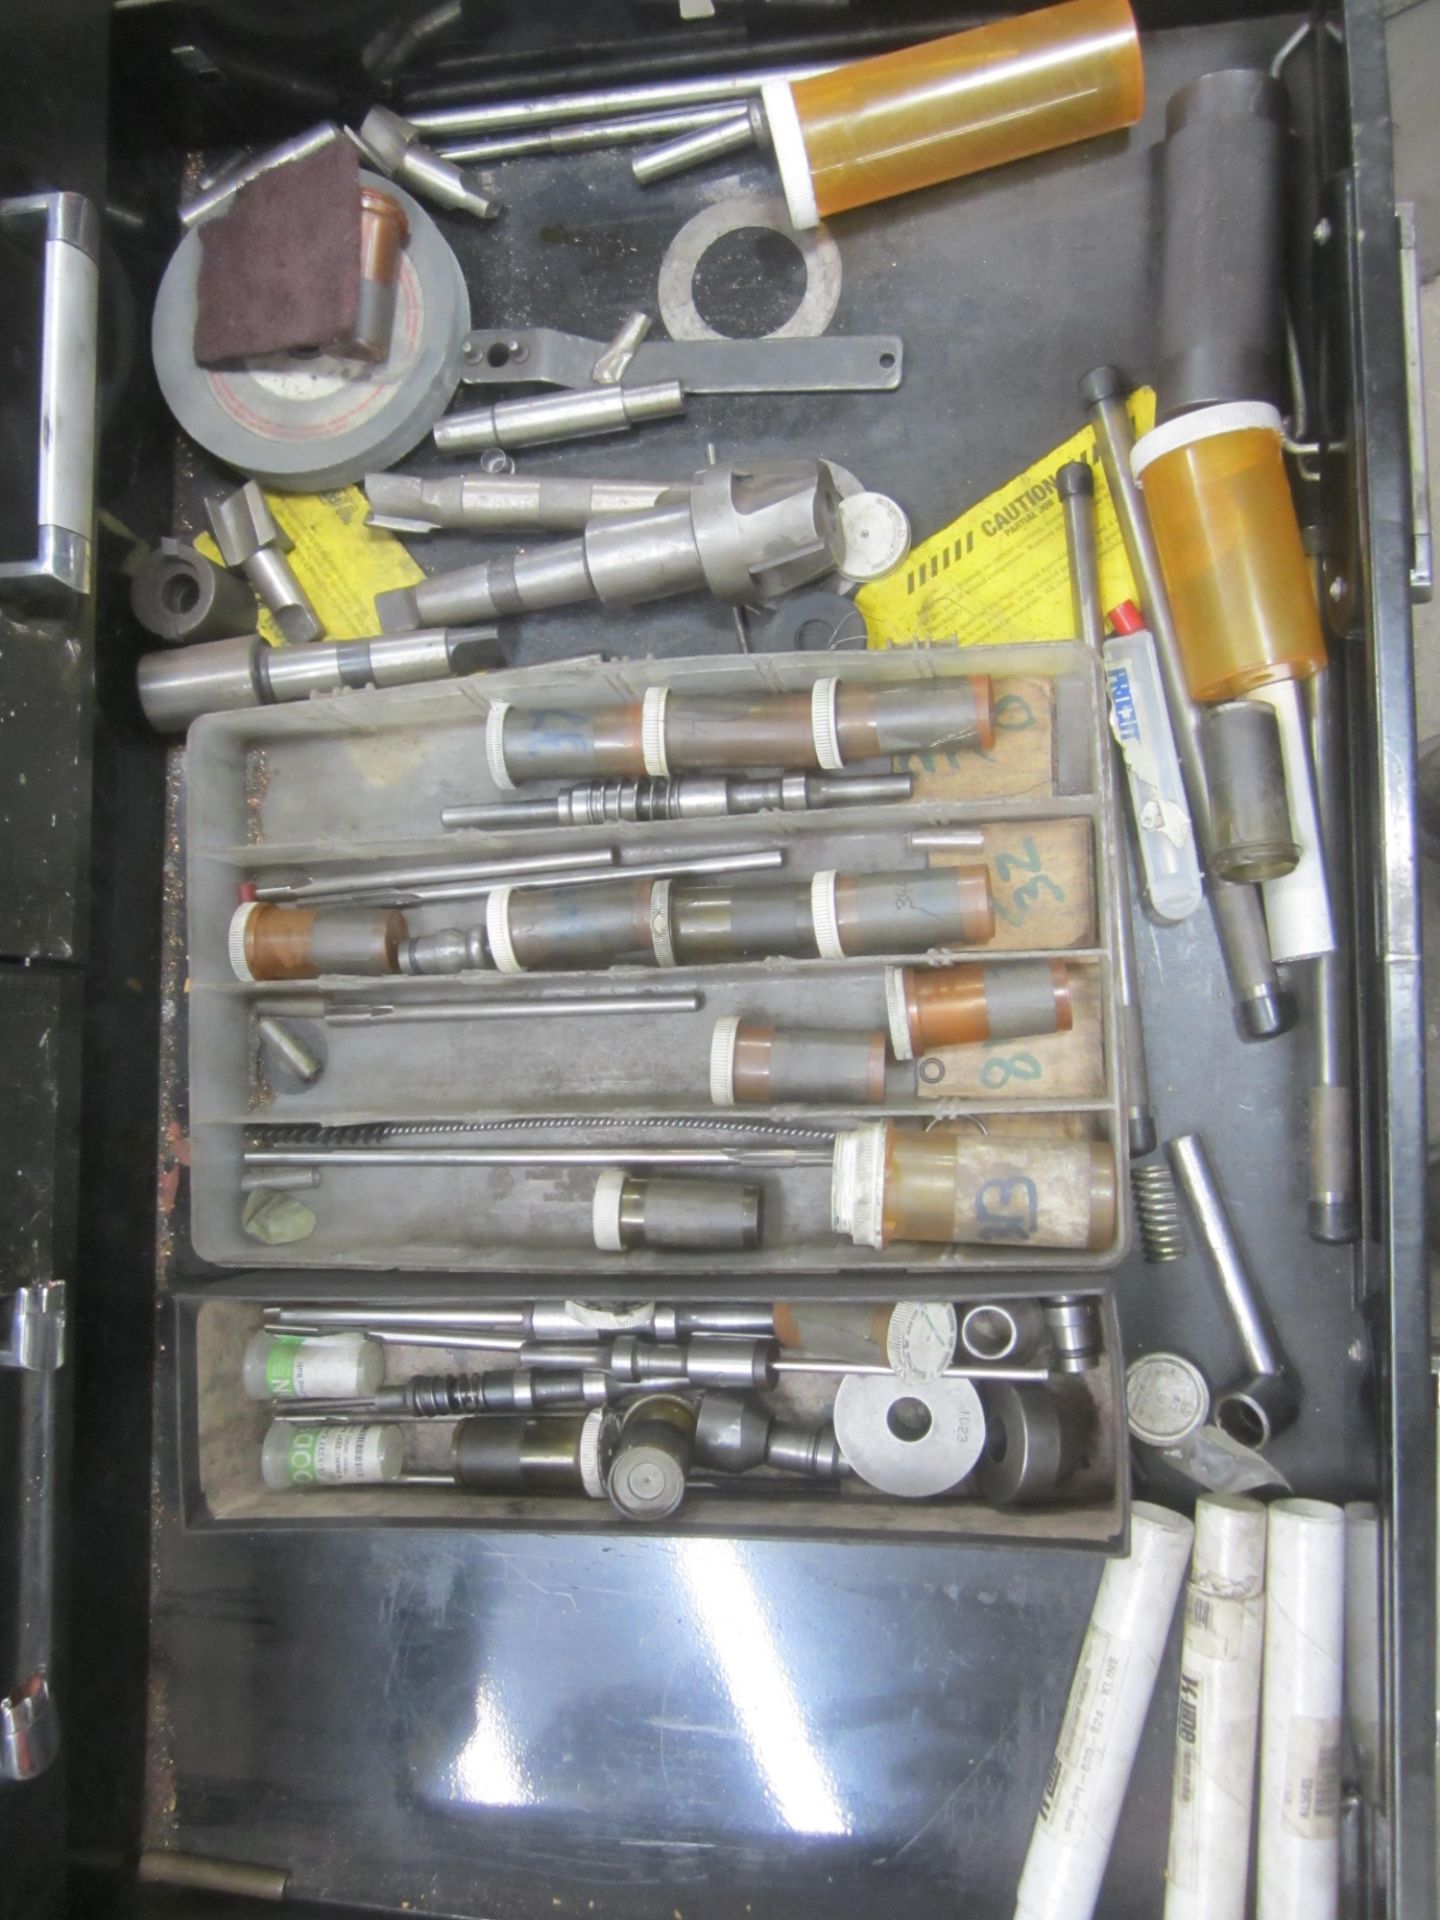 Matco Tool Cart with Bronze Valve Guide Liner Replacement Tools and Supplies - Image 4 of 5